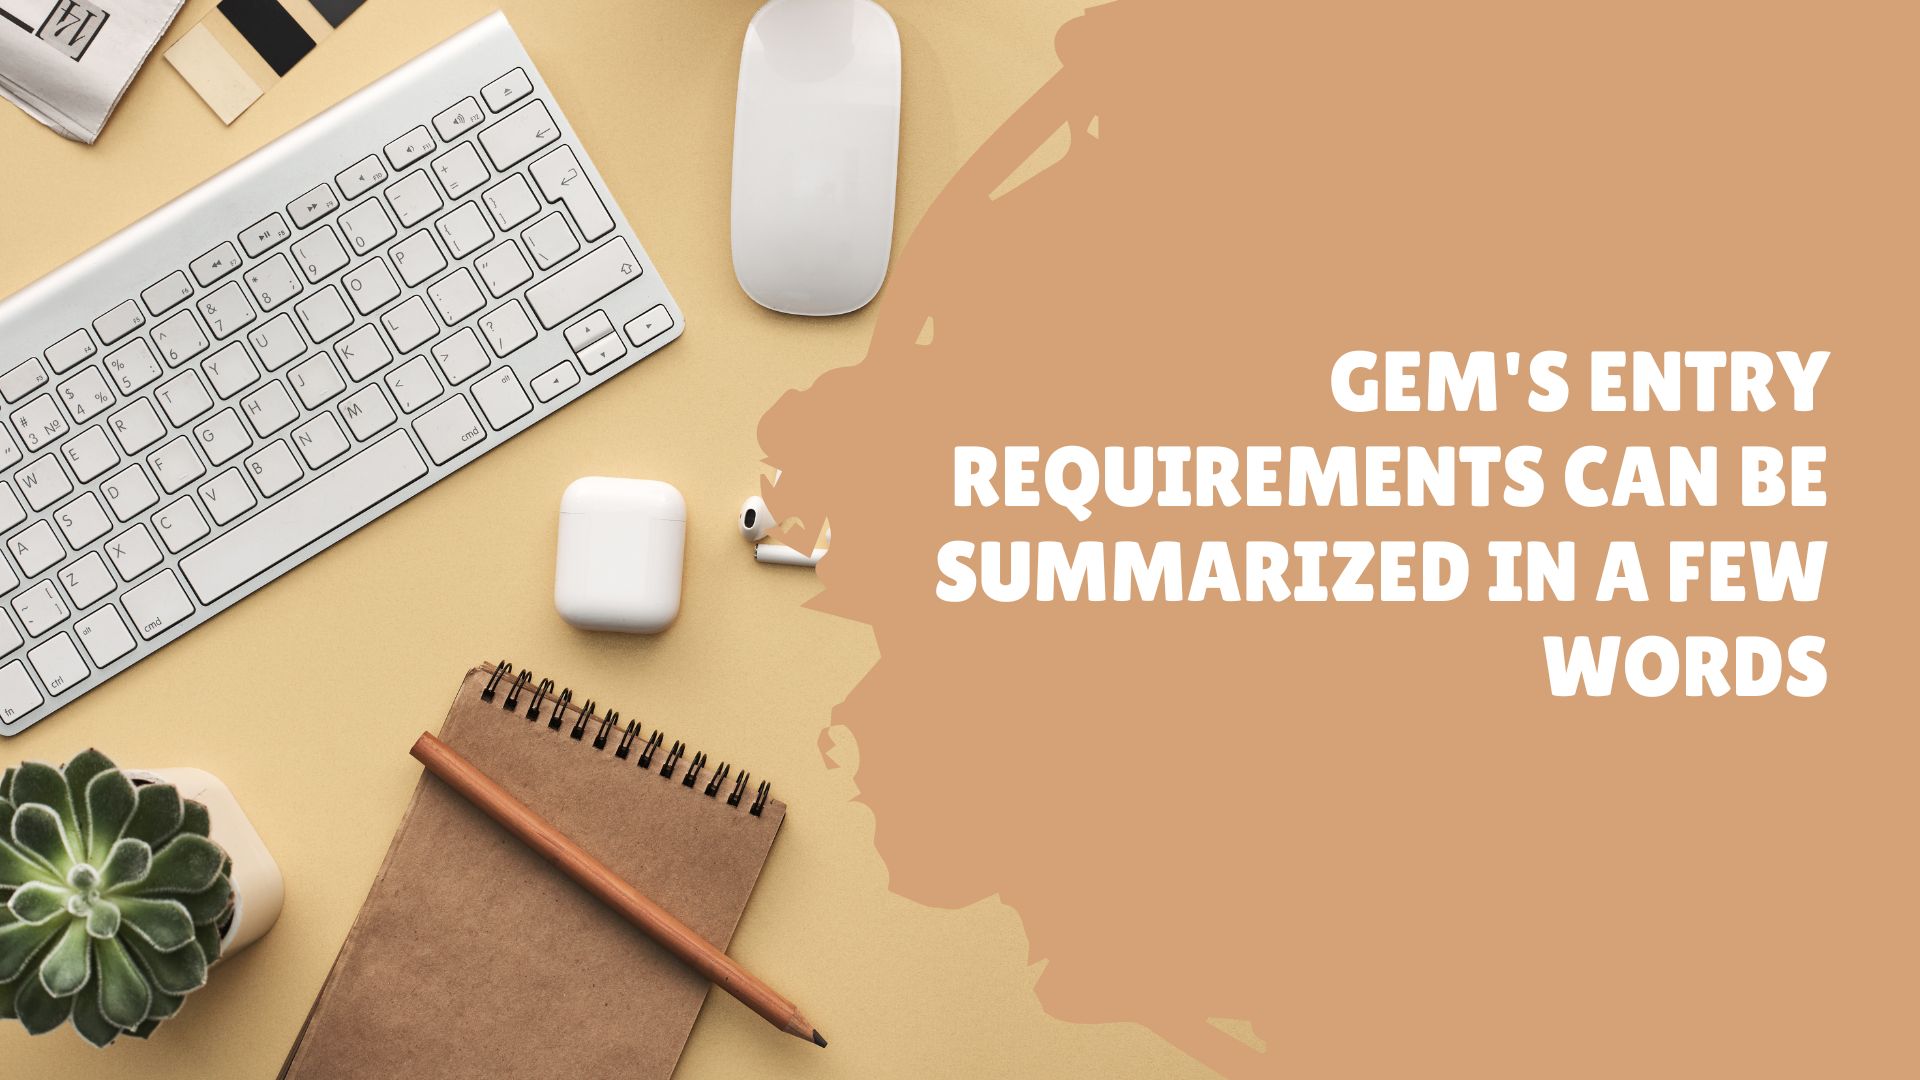 GeM's entry requirements can be summarized in a few words